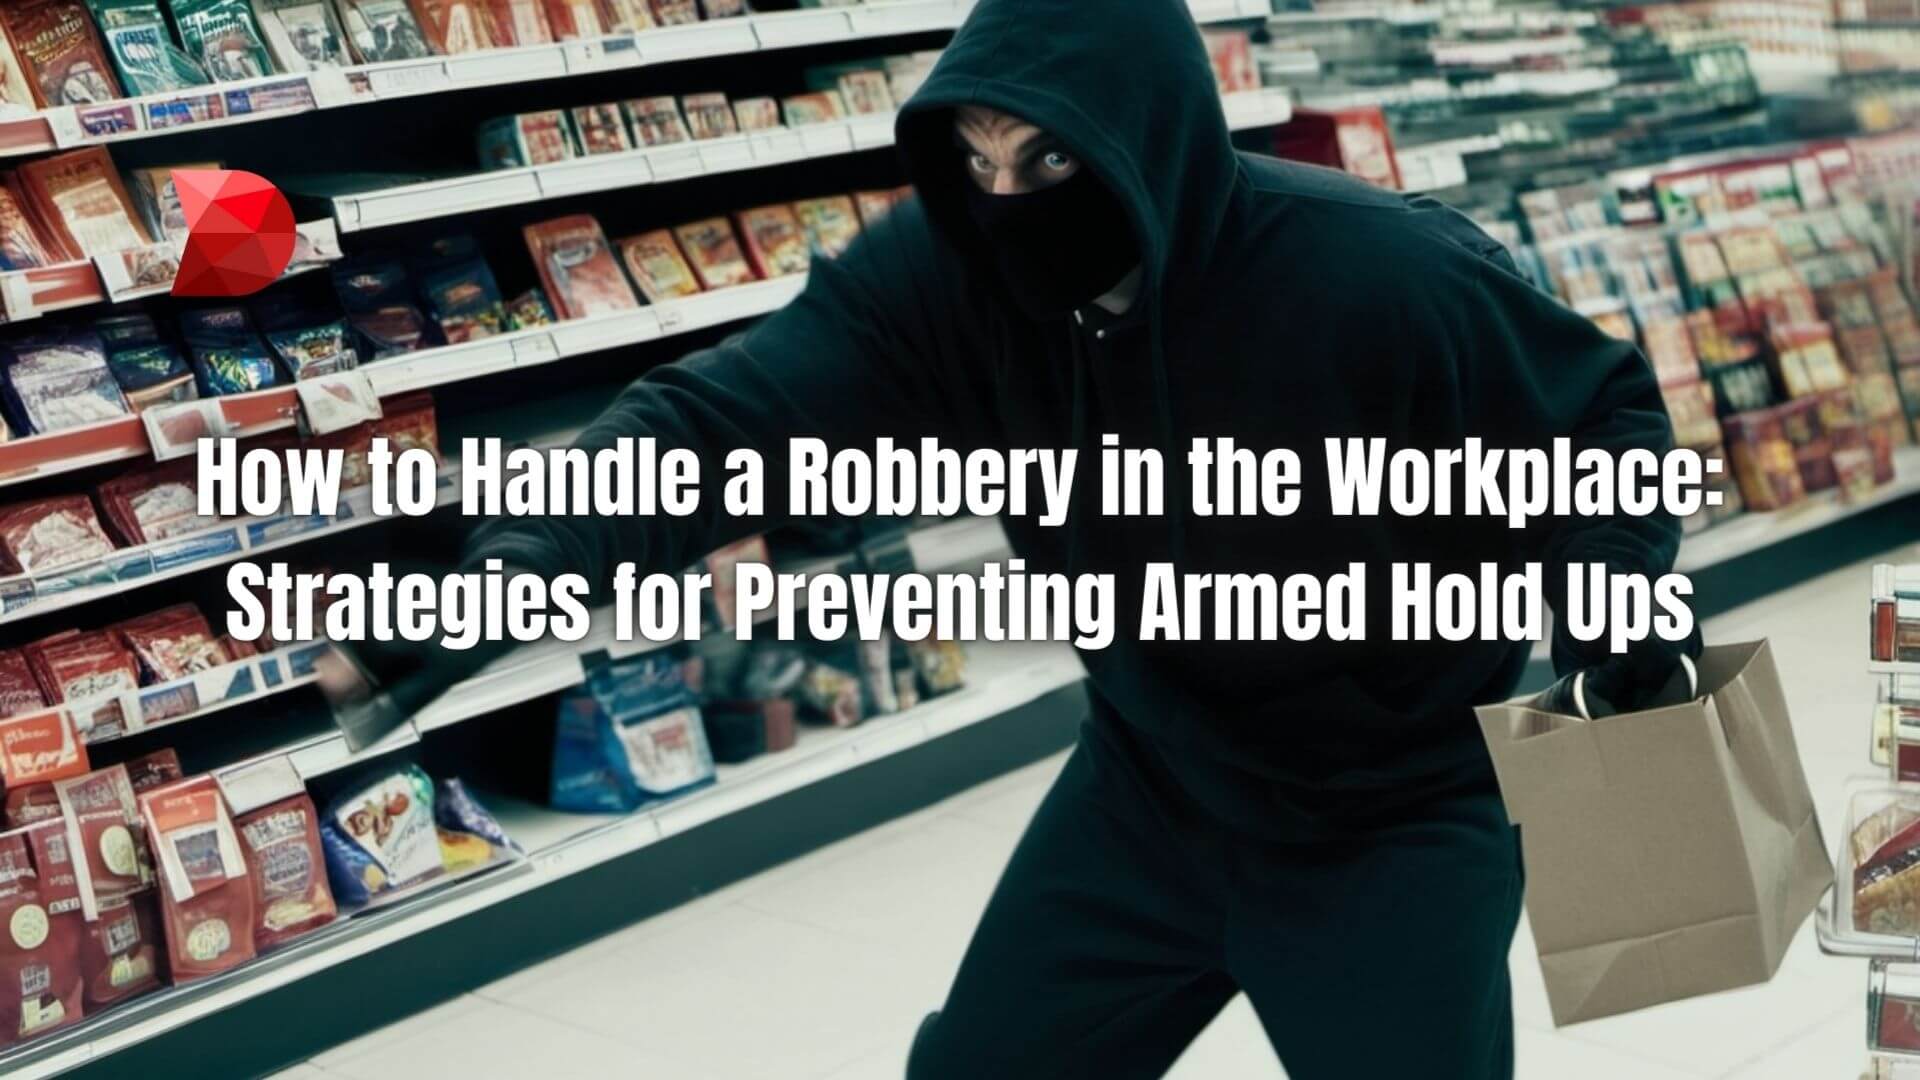 Discover expert strategies to prevent workplace armed robberies. Click here to learn how to handle a robbery in the workplace.